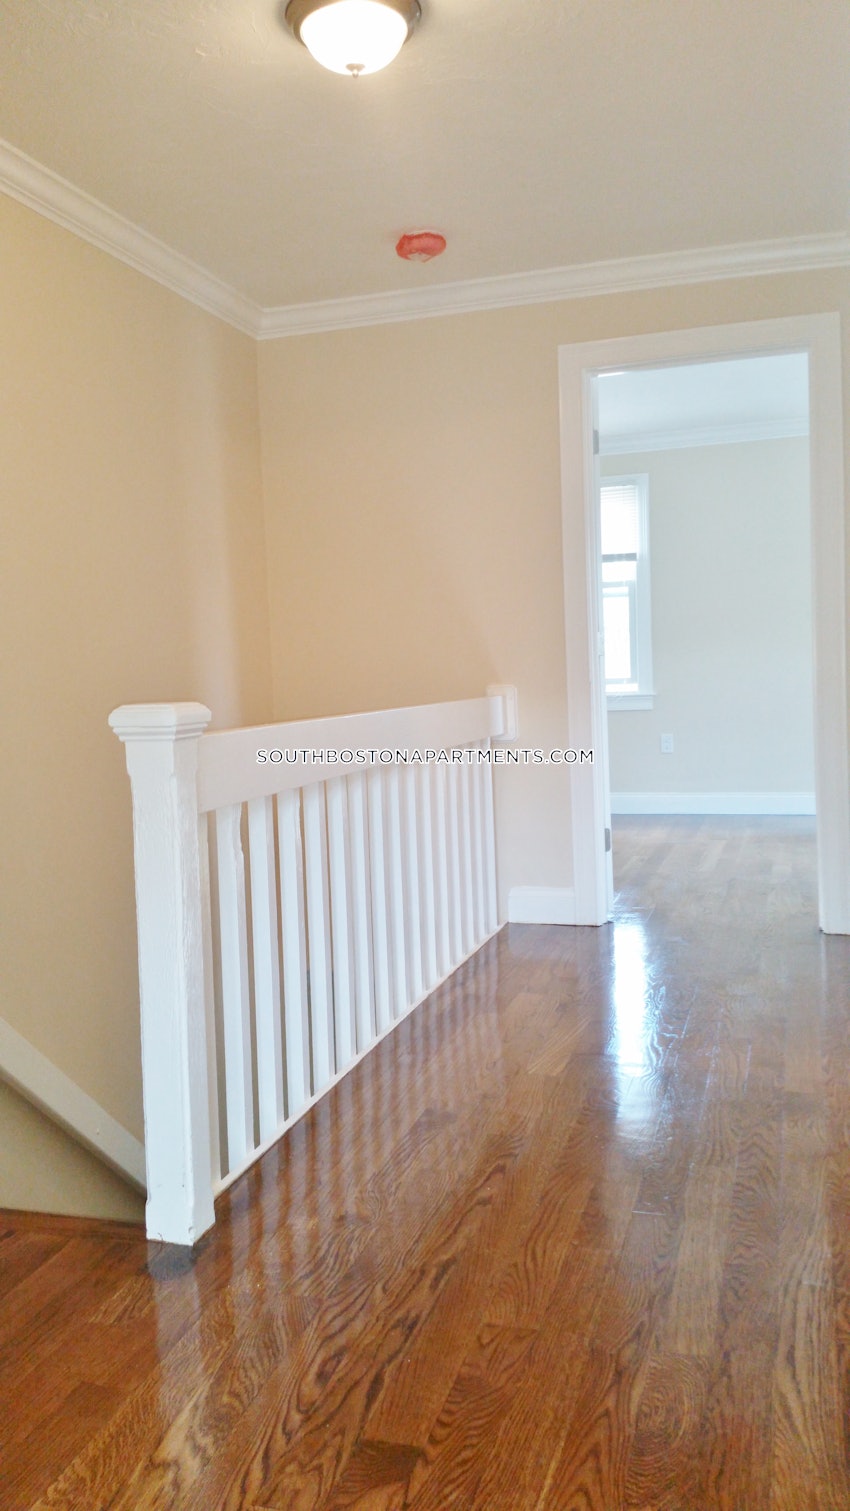 BOSTON - SOUTH BOSTON - ANDREW SQUARE - 4 Beds, 1.5 Baths - Image 25